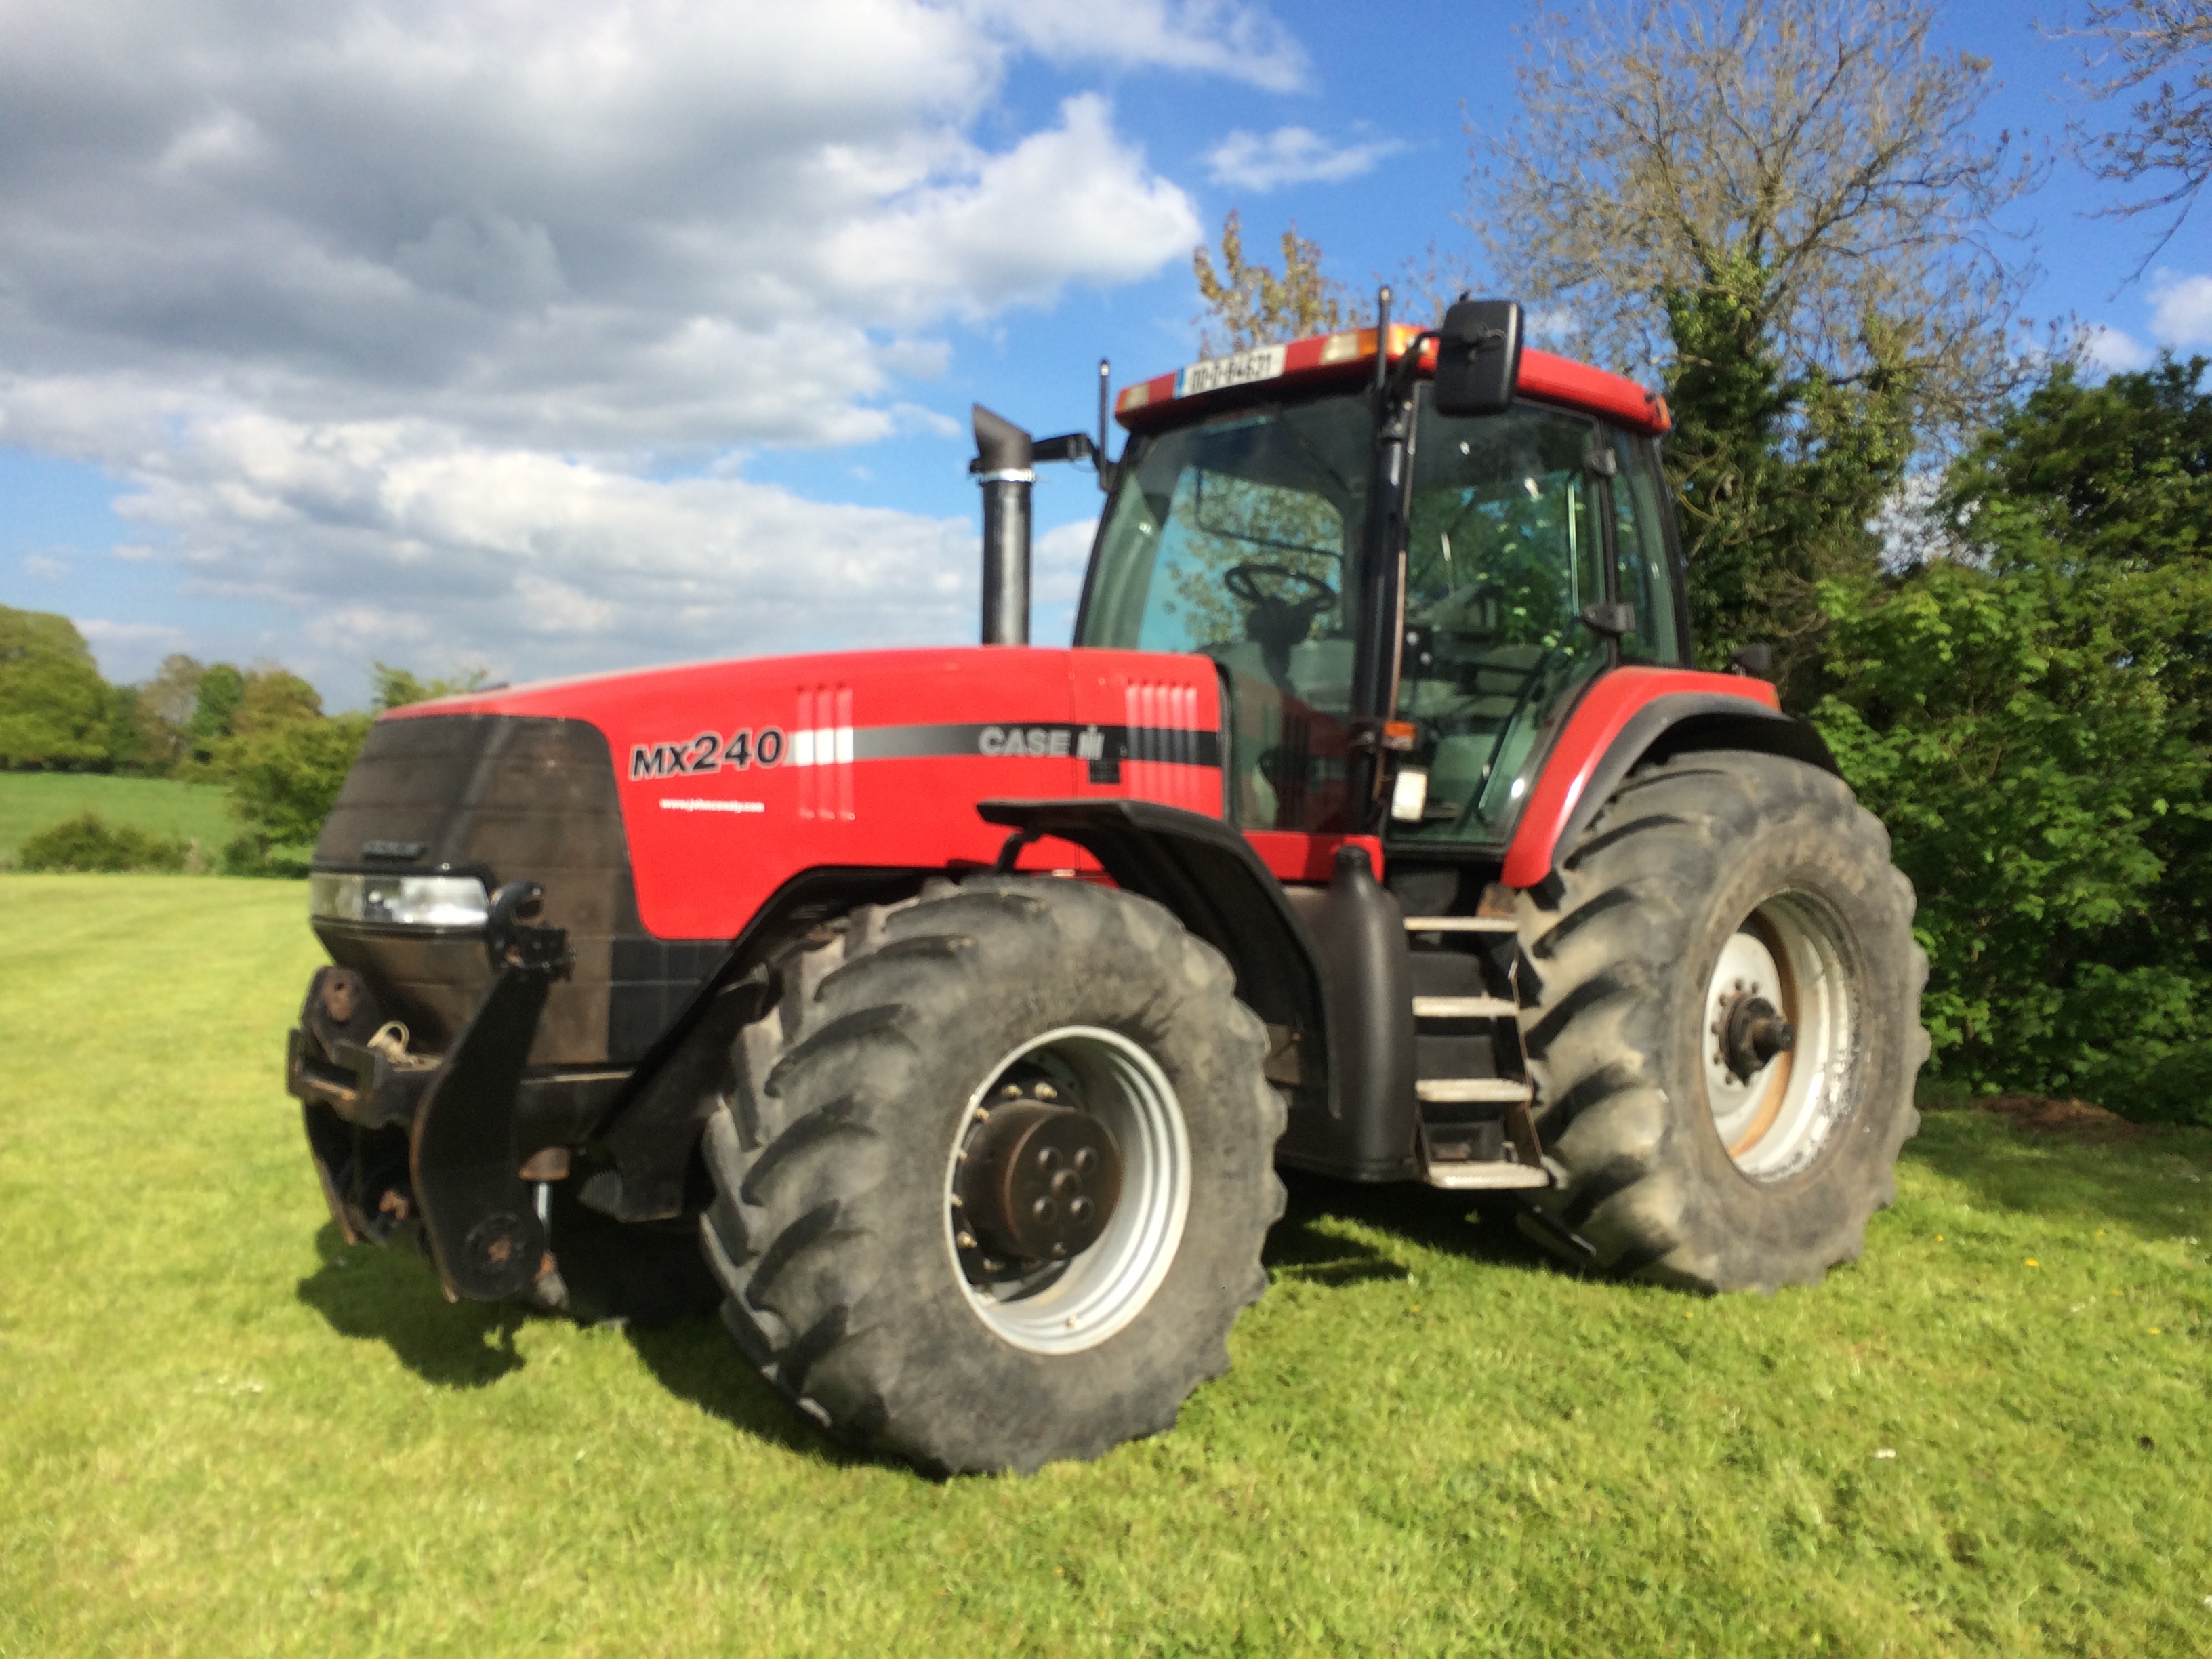 Case IH MAGNUM 240 for sale - Price: $25,555, Year: 2000 | Used Case ...